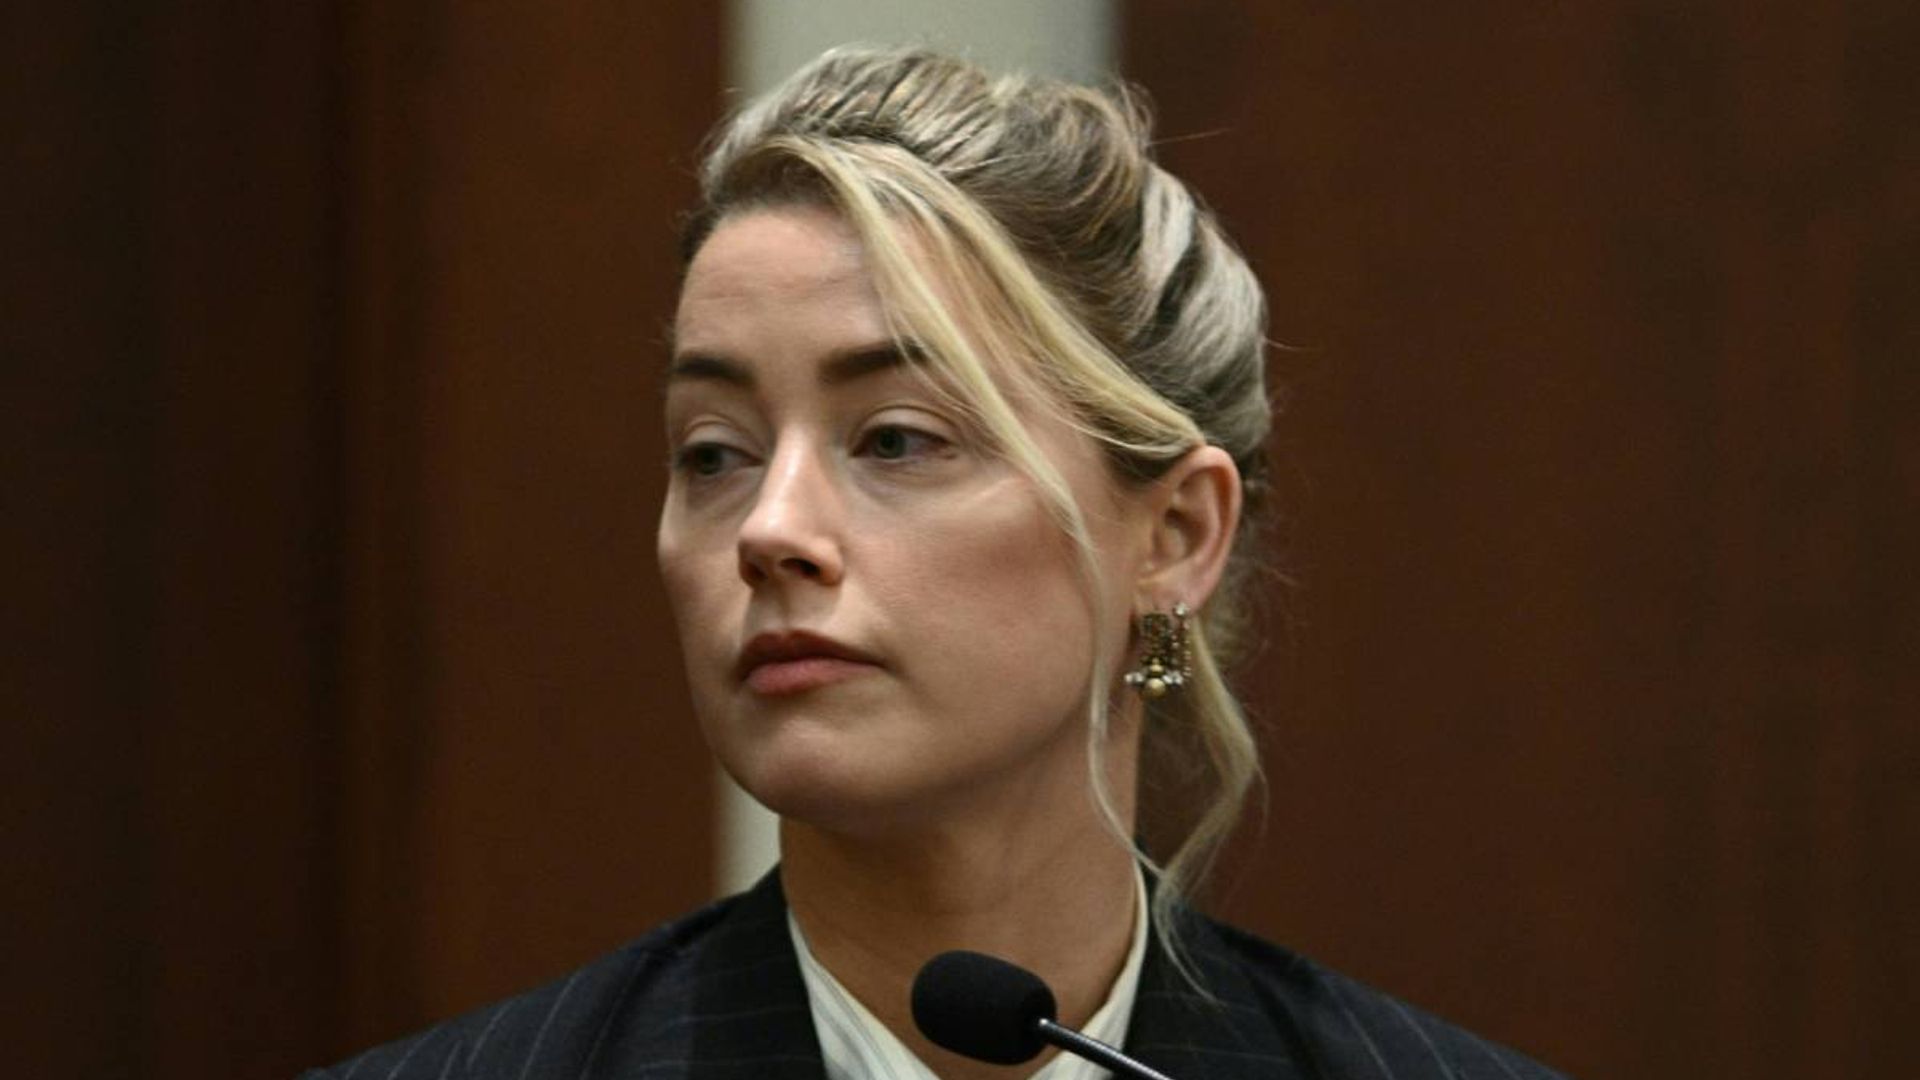 Amber Heard's personal notes from Johnny Depp trial released - details